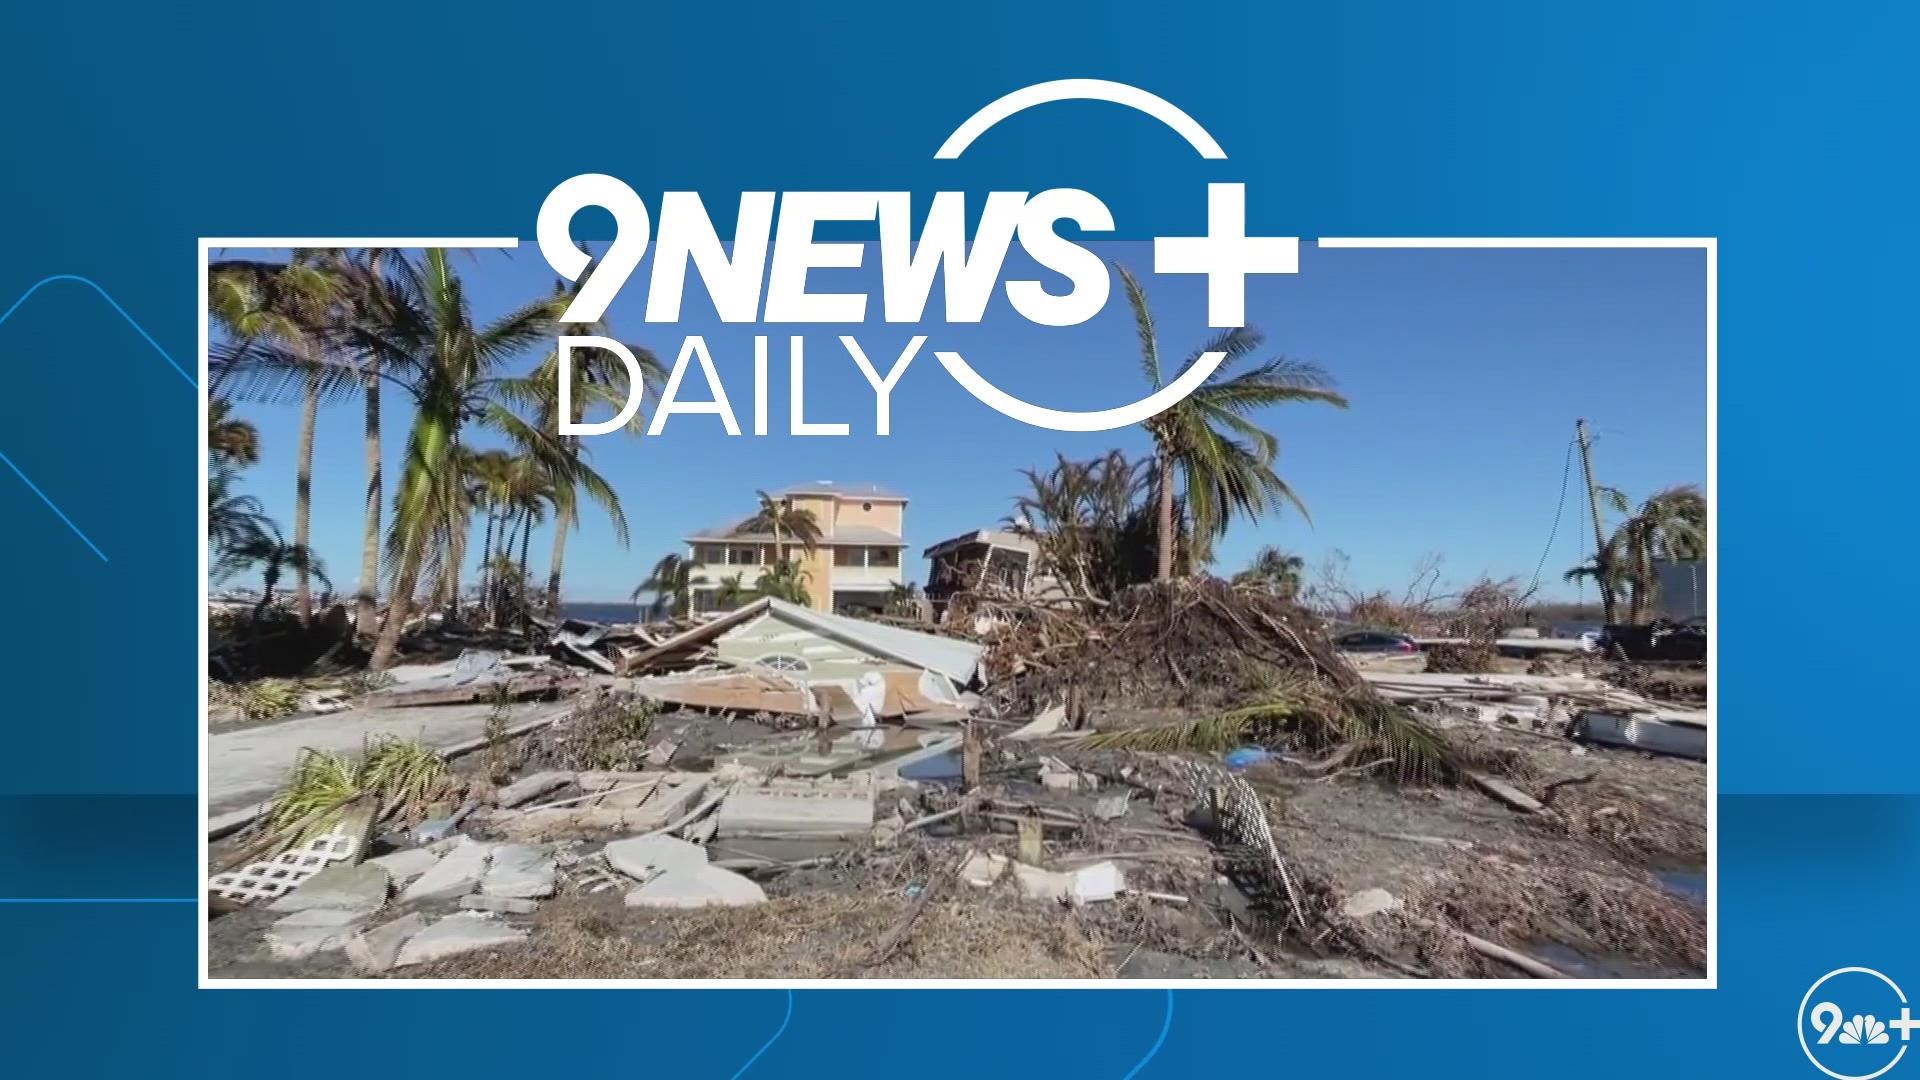 Meteorologist Chris Bianchi recaps his time in Florida covering Hurricane Ian for 9NEWS sister station WTSP.